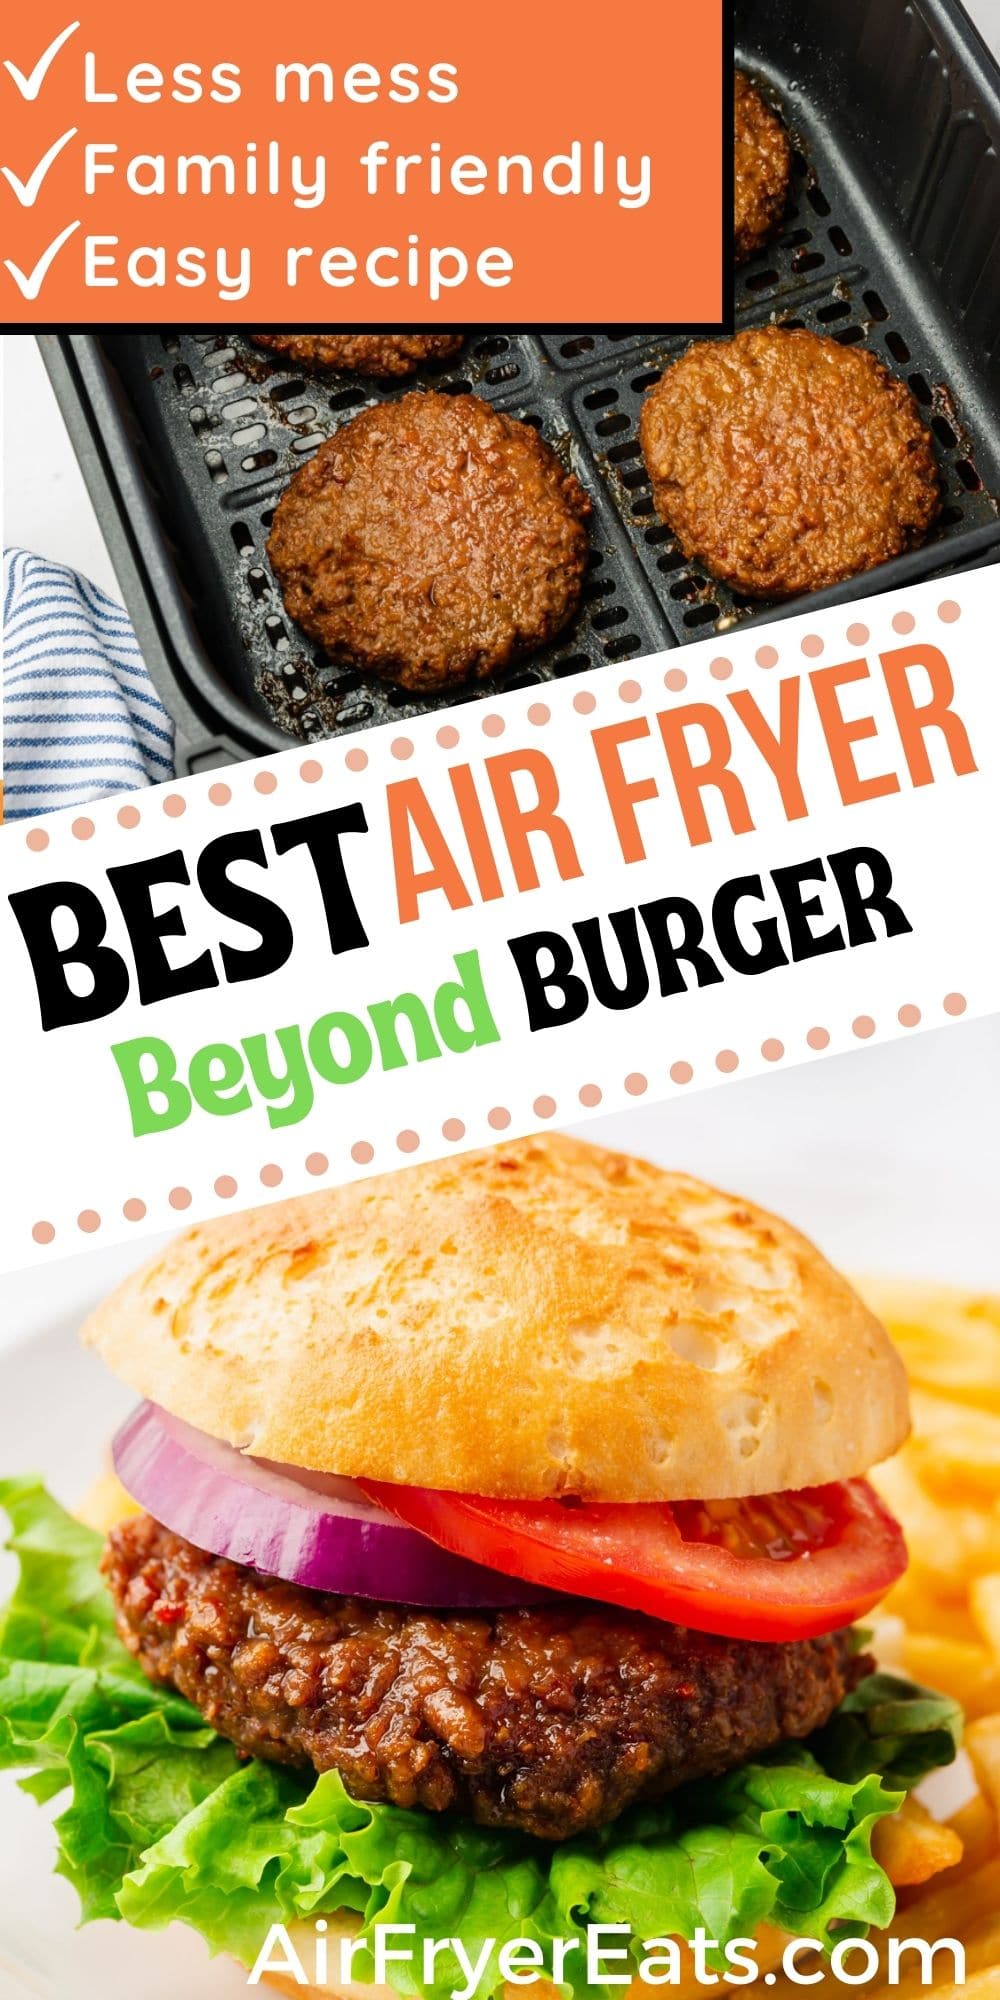 Learn to make an Air Fryer Beyond Burger! These vegetarian burger patties are so delicious and ready in just minutes using your favorite countertop appliance. via @vegetarianmamma